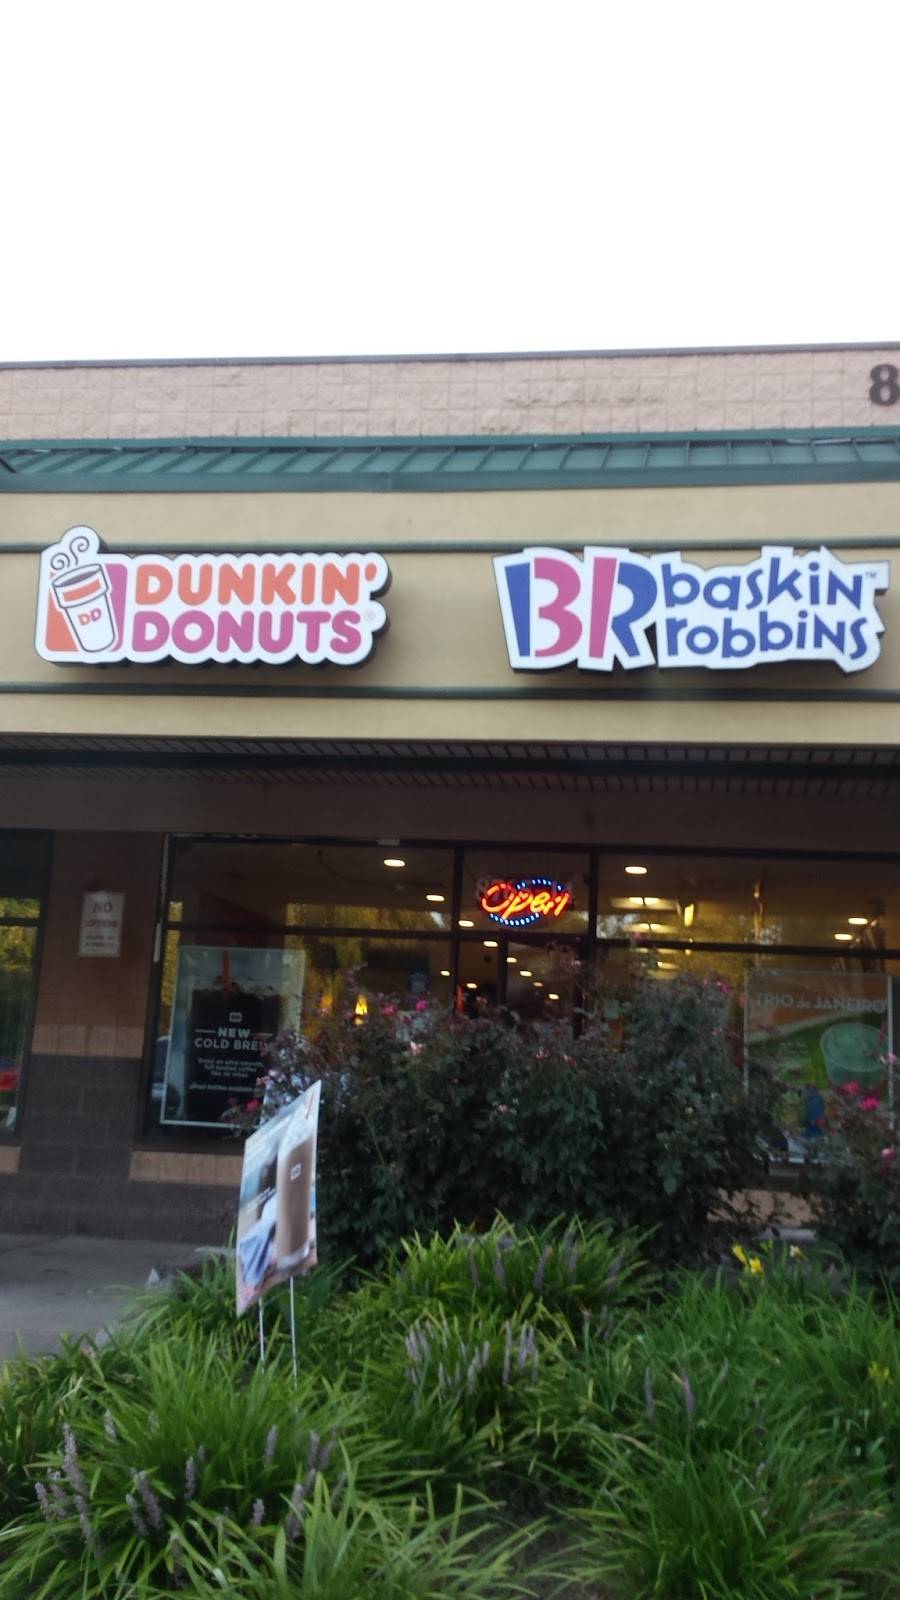 Dunkin Donuts | cafe | 8765 Centre Park Dr, Columbia, MD 21045, USA | 4107406661 OR +1 410-740-6661